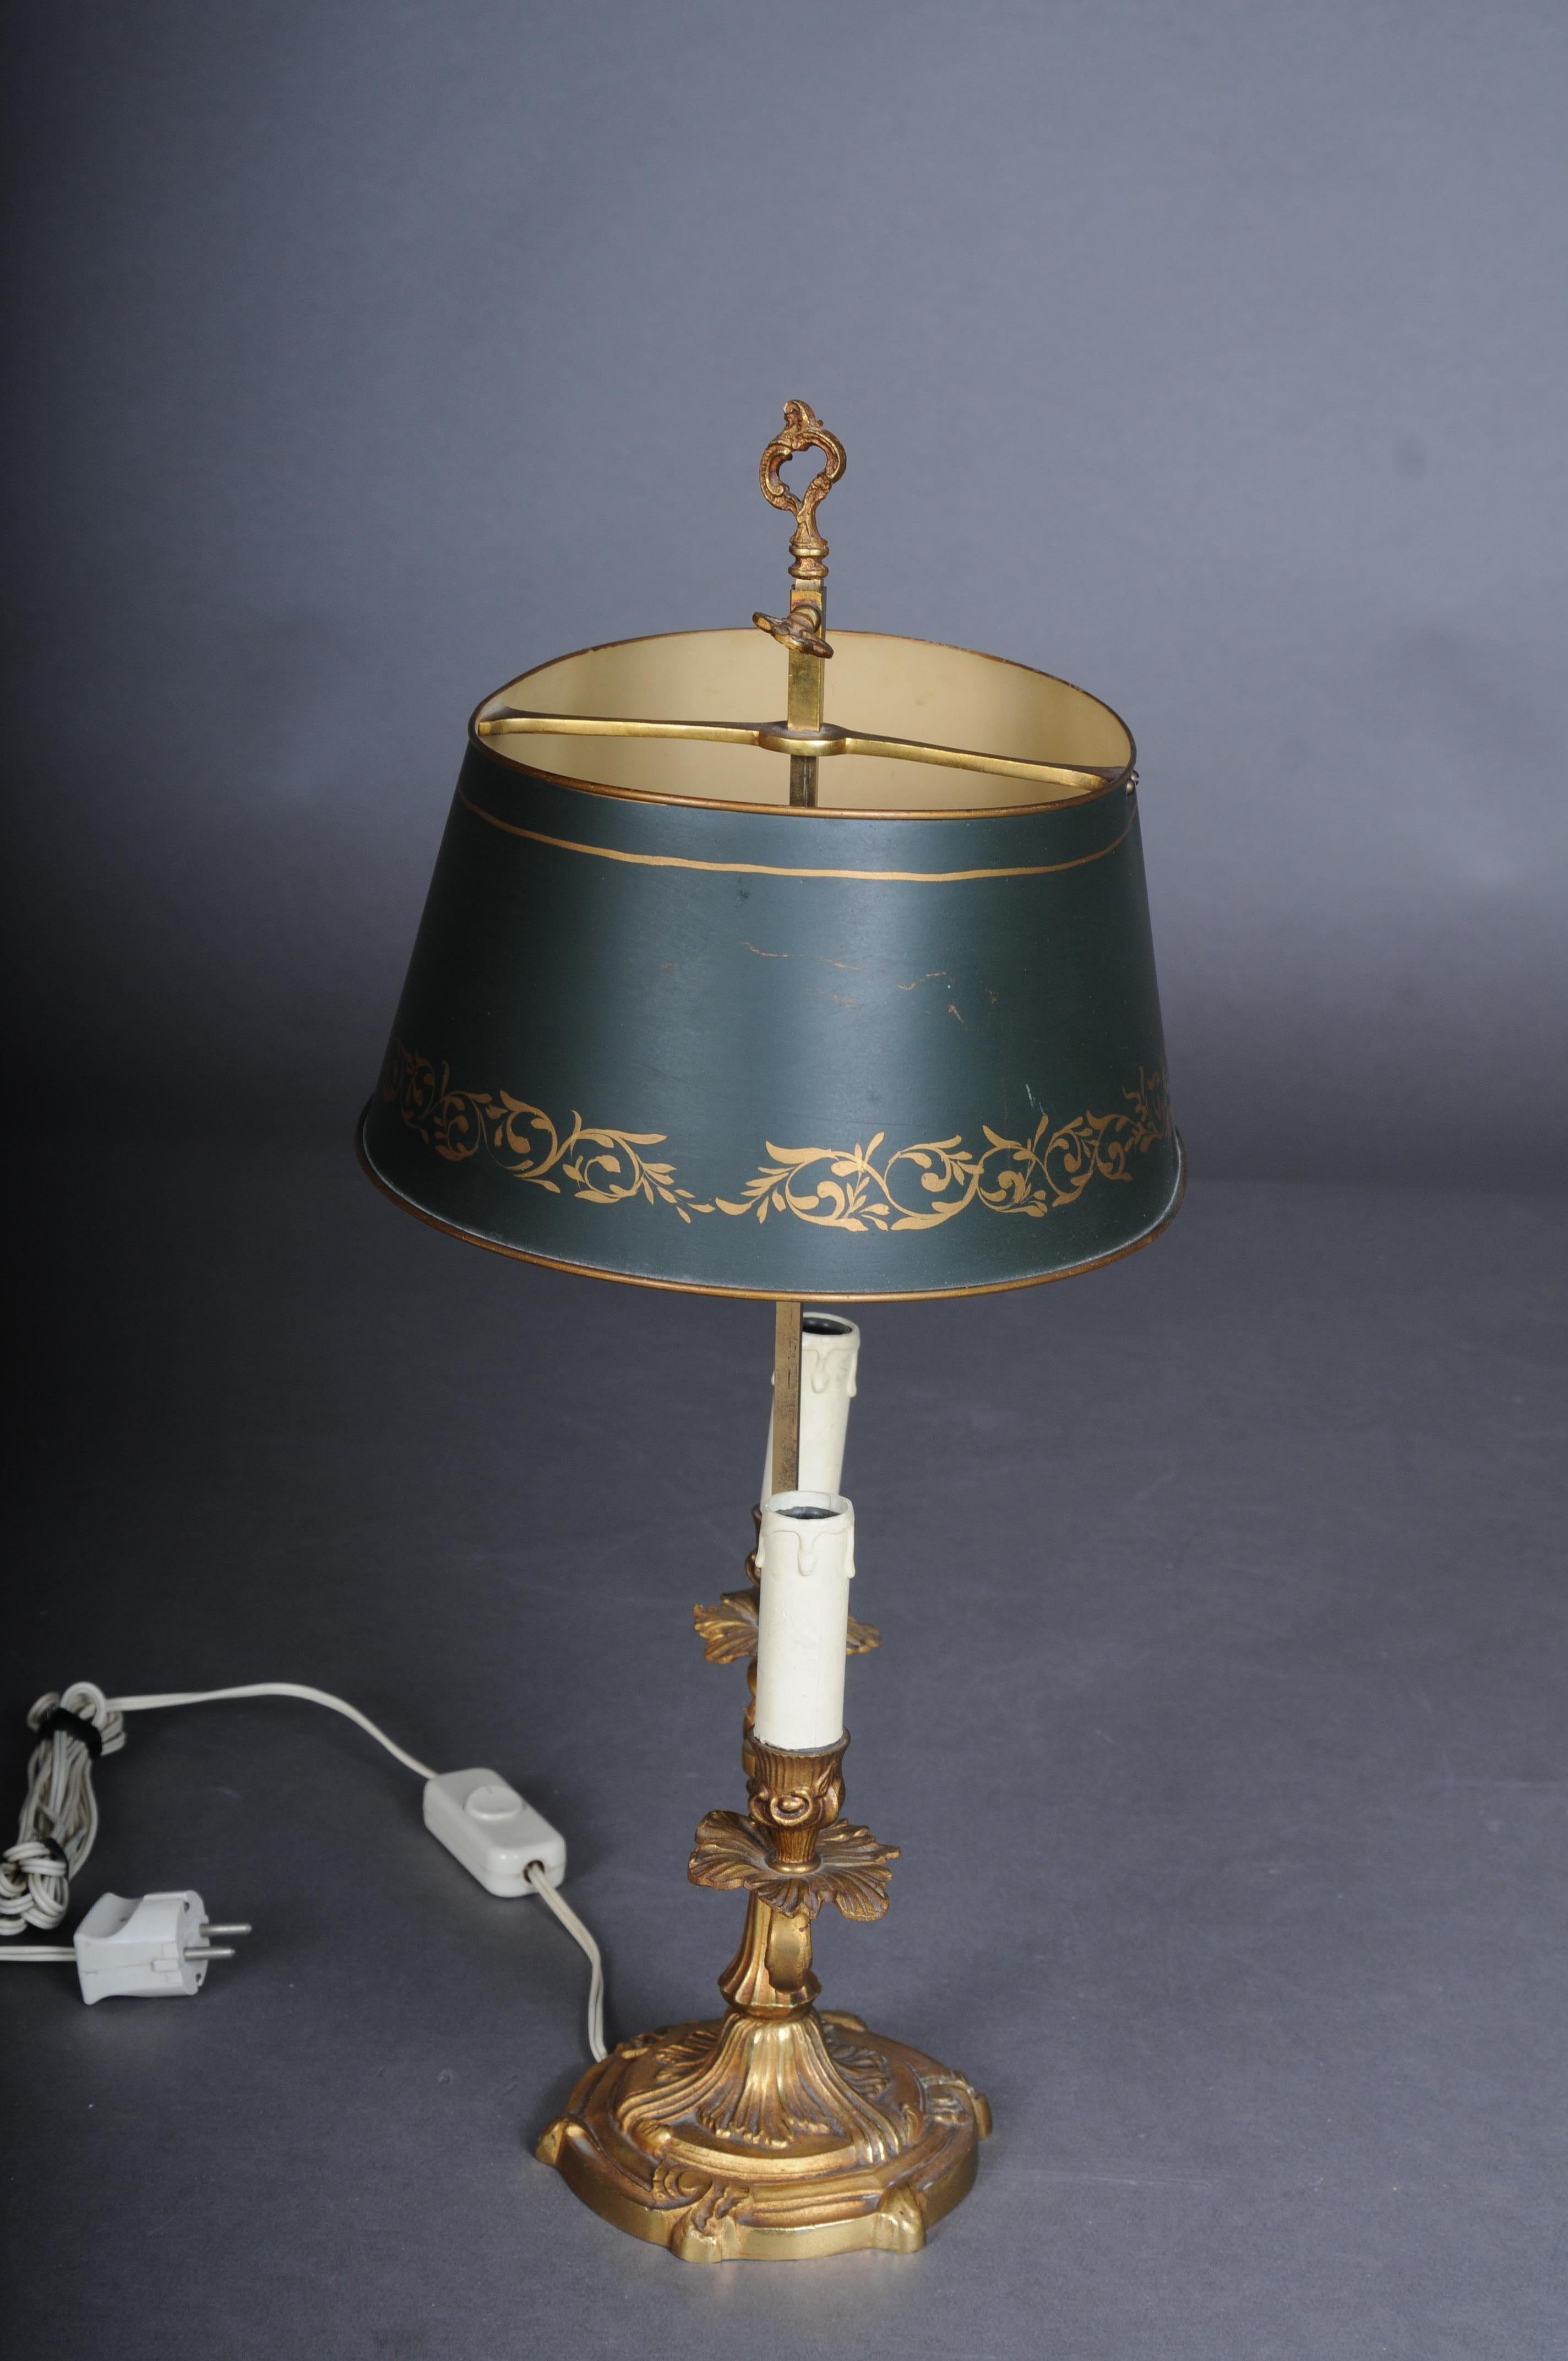 Antique Desk Lamp / Table Lamp Empire circa 1900, Gold-Plated Bronze For Sale 1